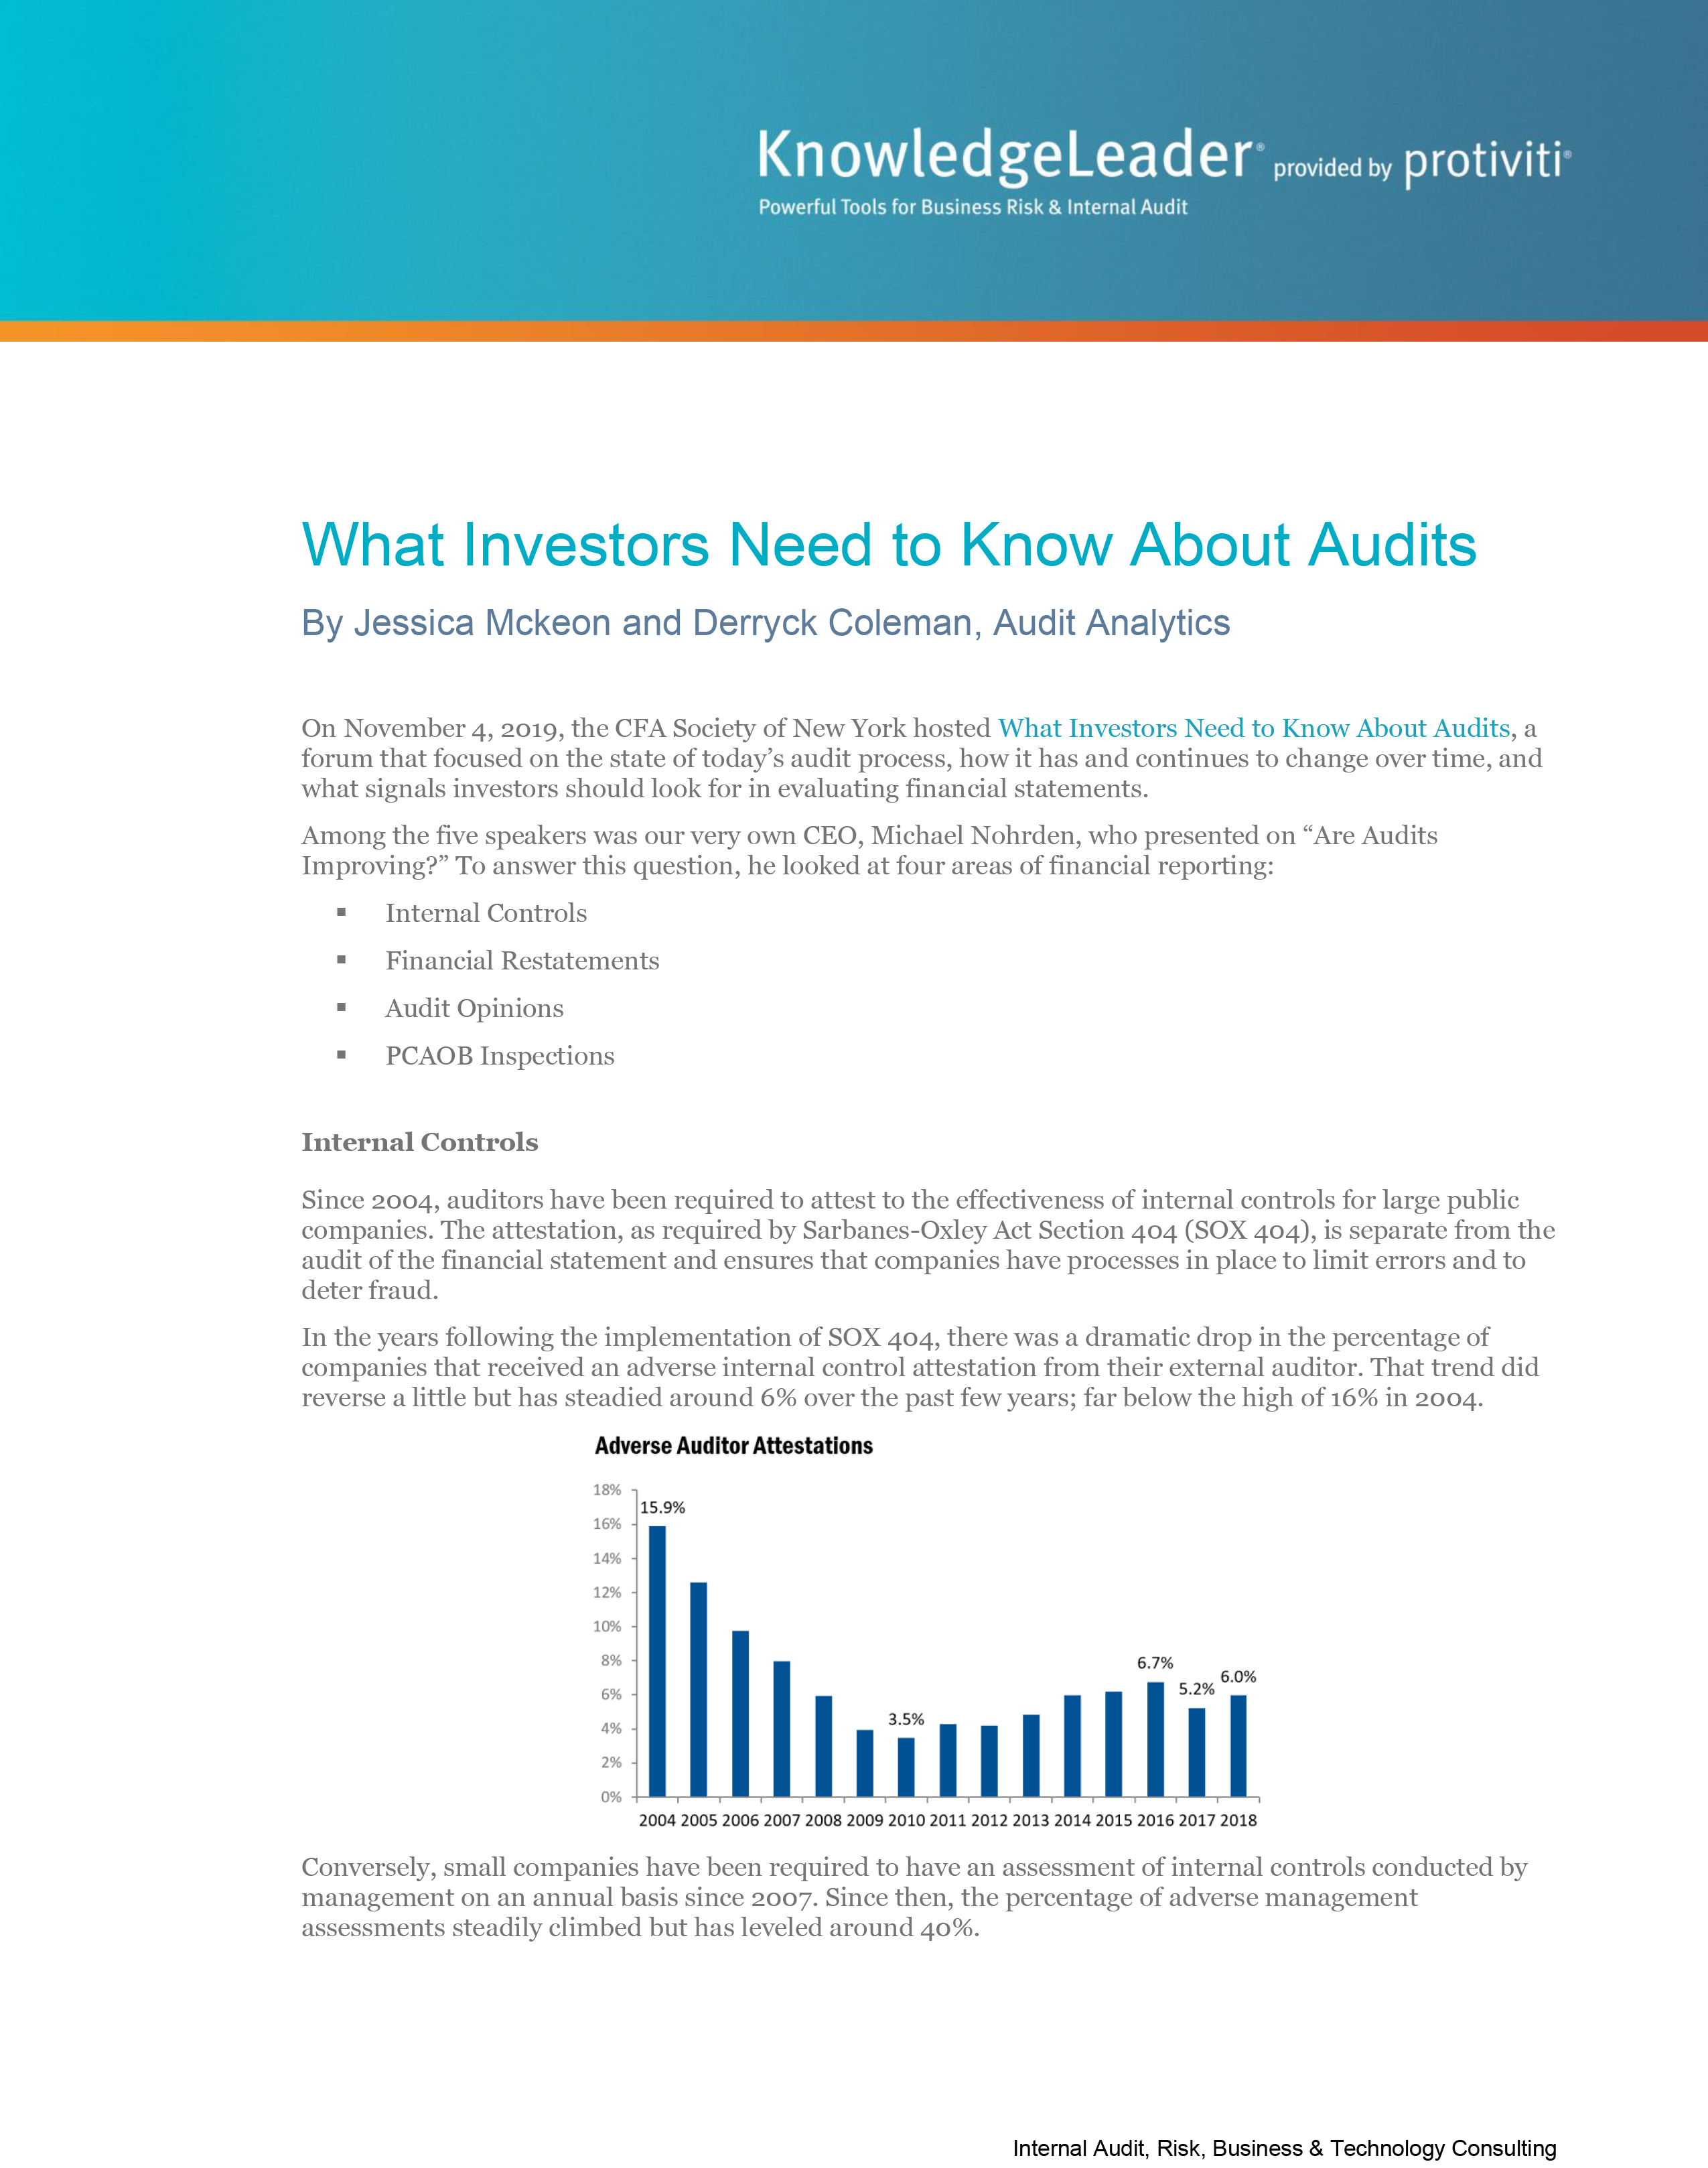 Screenshot of the first page of What Investors Need to Know About Audits